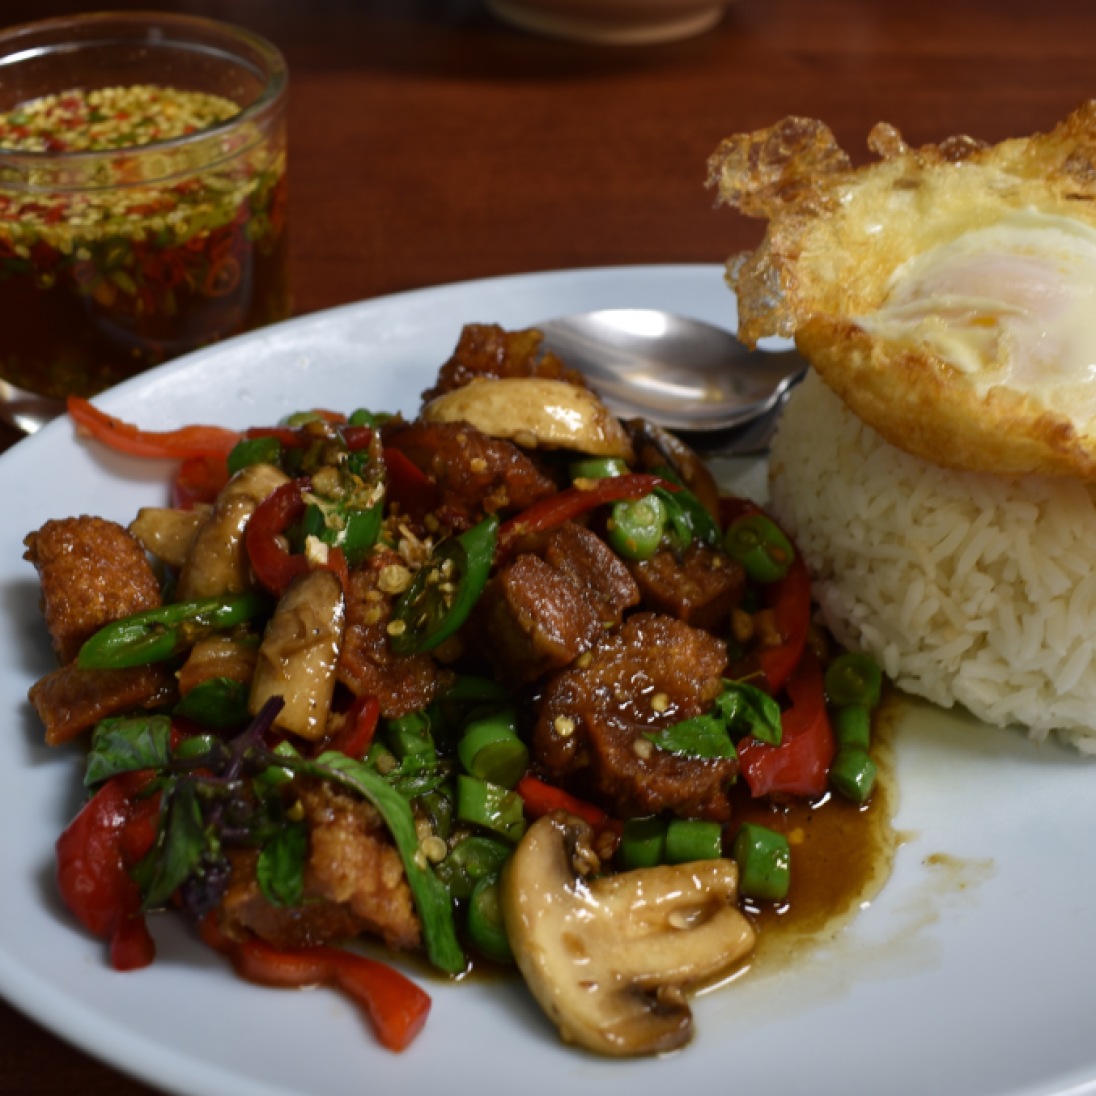 This Thai favorite is the crispy pork and holy basil rice dish. The fried egg is extra, but well worth it.